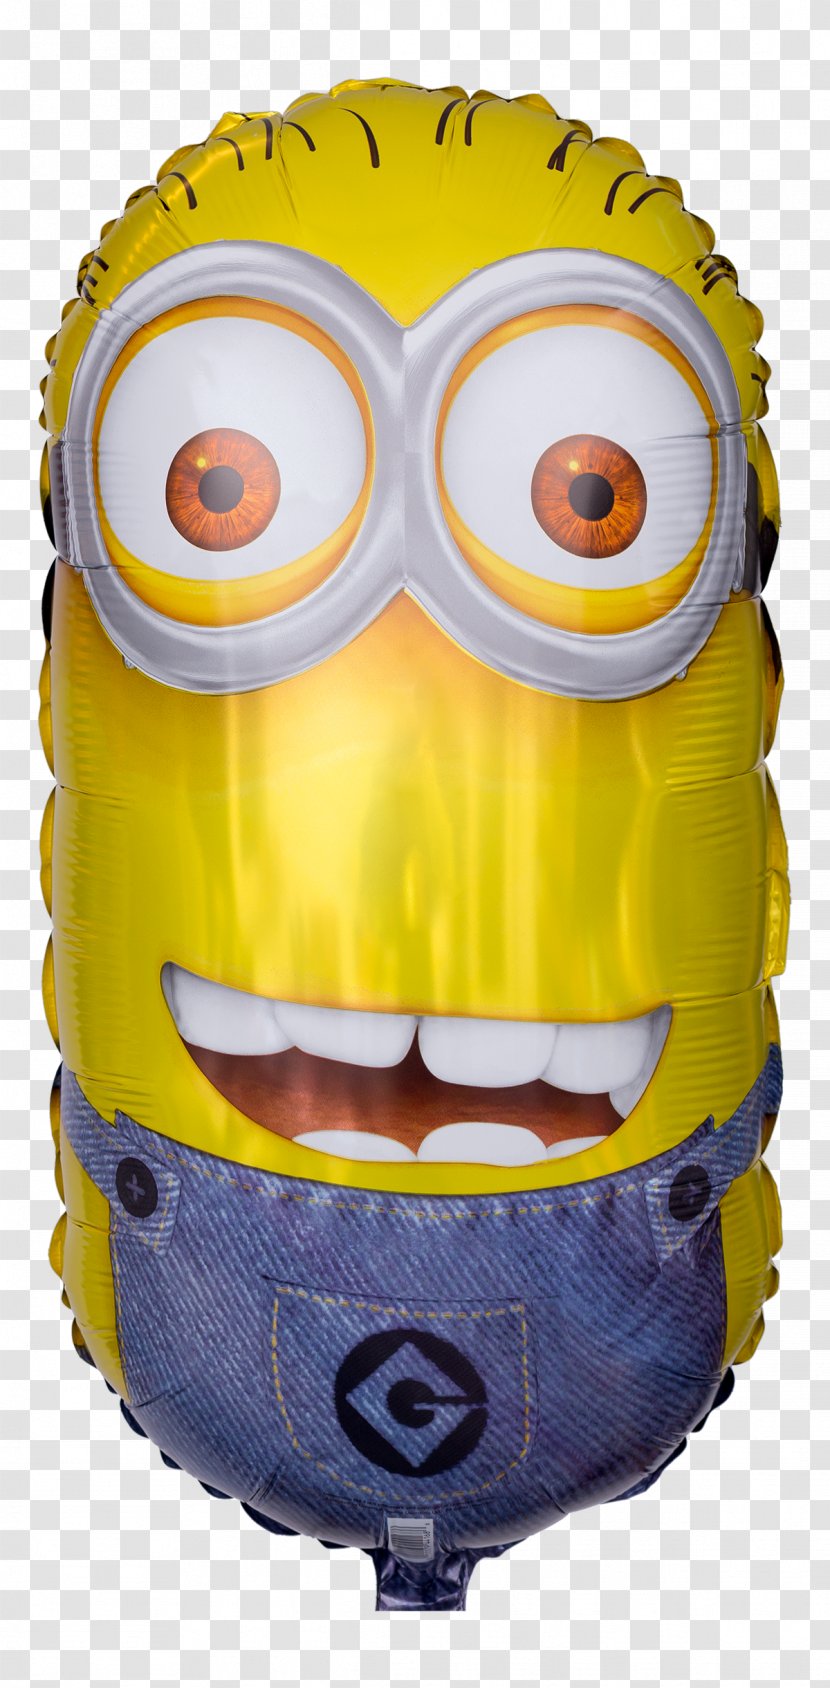 Toy Balloon Stuart The Minion Child - Party Supply Transparent PNG